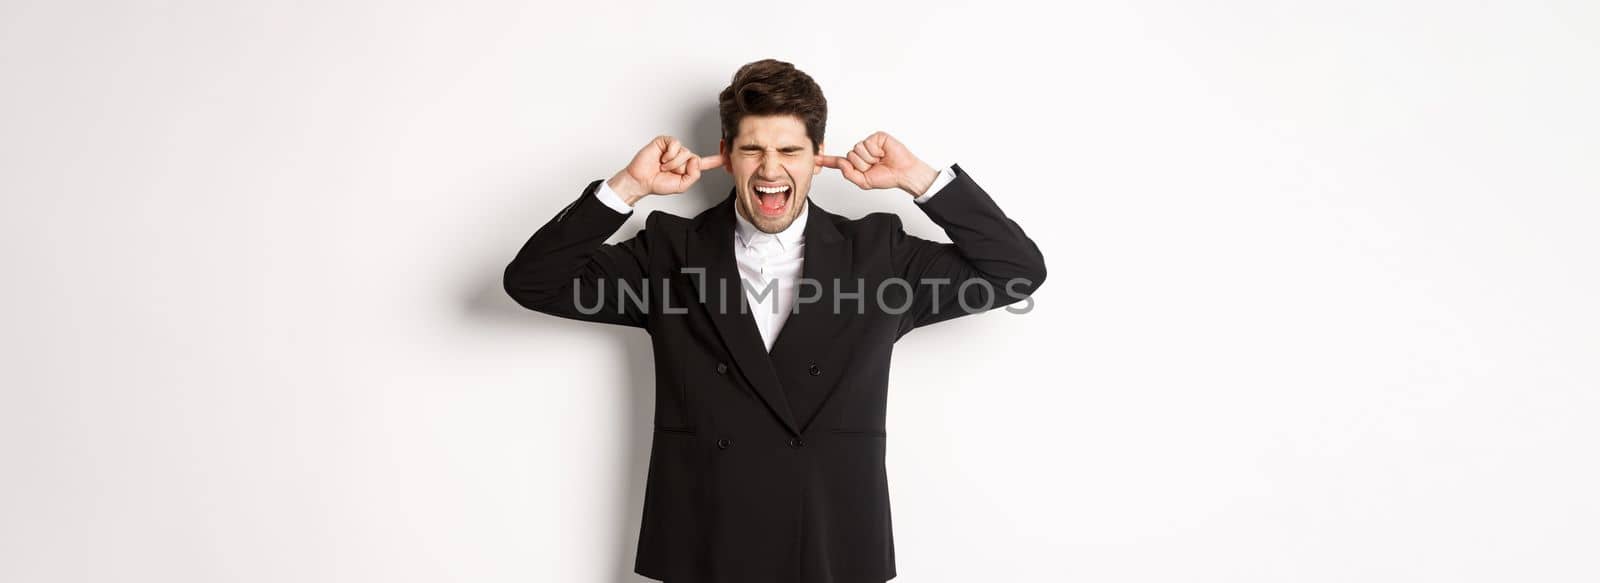 Portrait of annoyed and bothered businessman in black suit, shut ears and yelling, complaining loud noise, standing against white background.